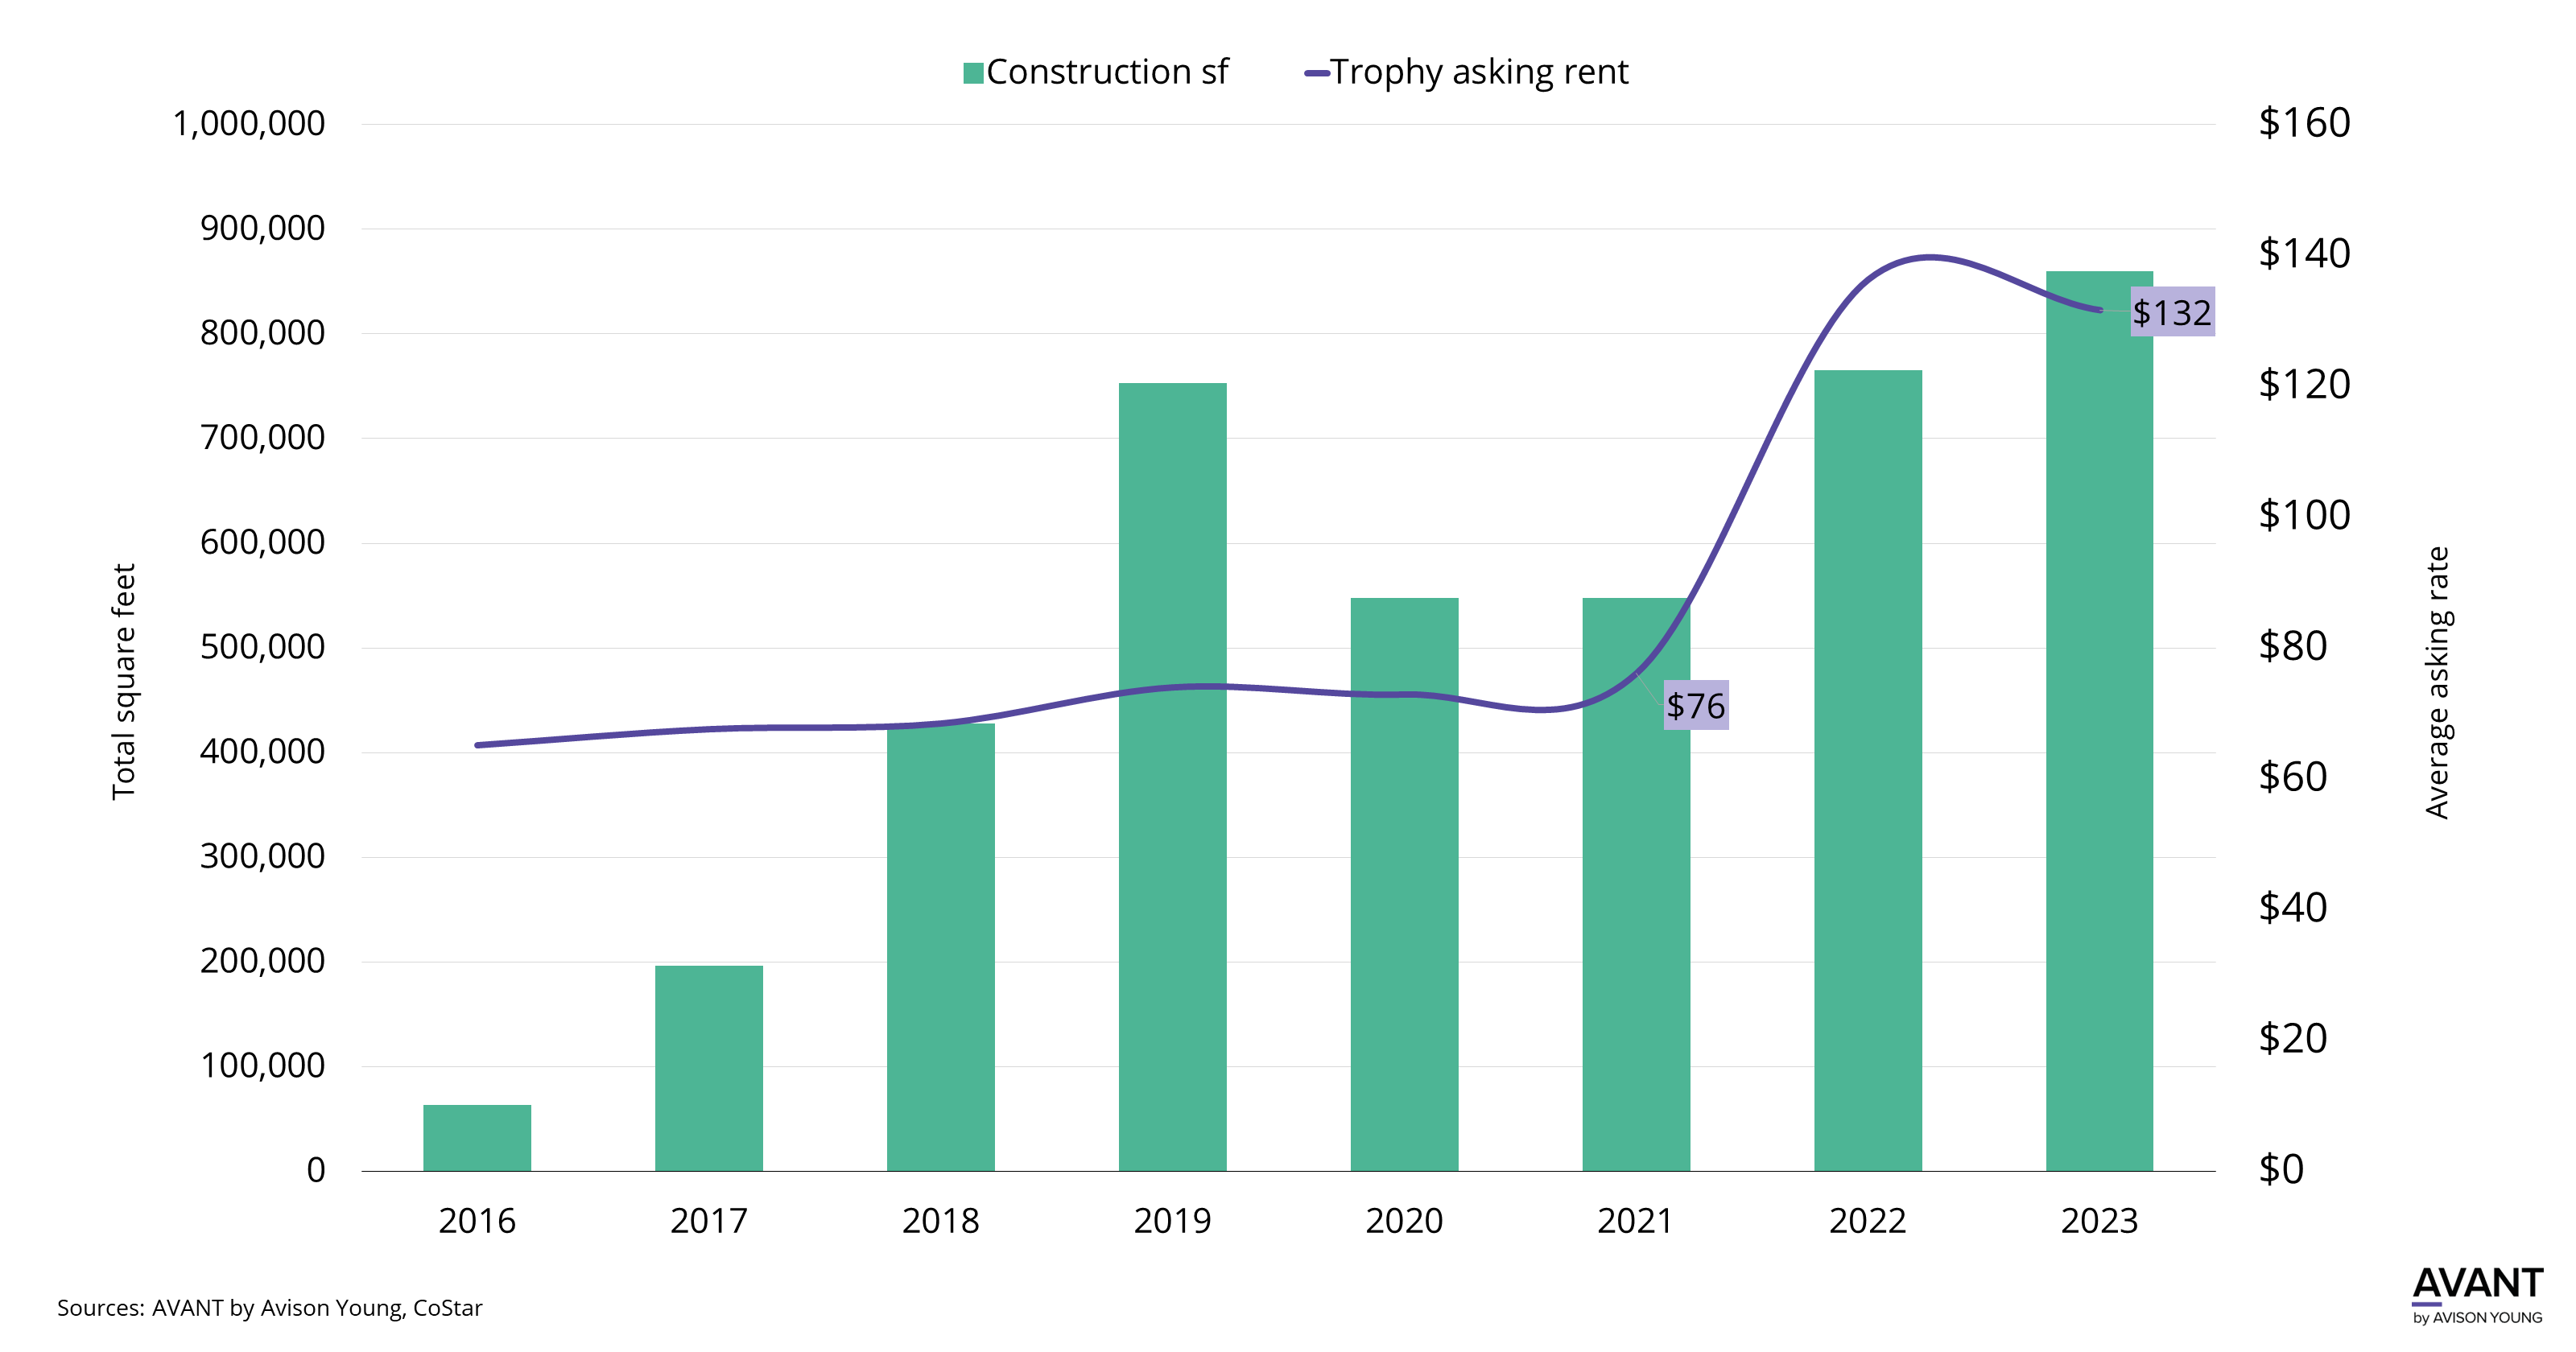 graph of office square feet under construction in West Palm Beach as trophy asking rents continue increasing from 2016 to 2023